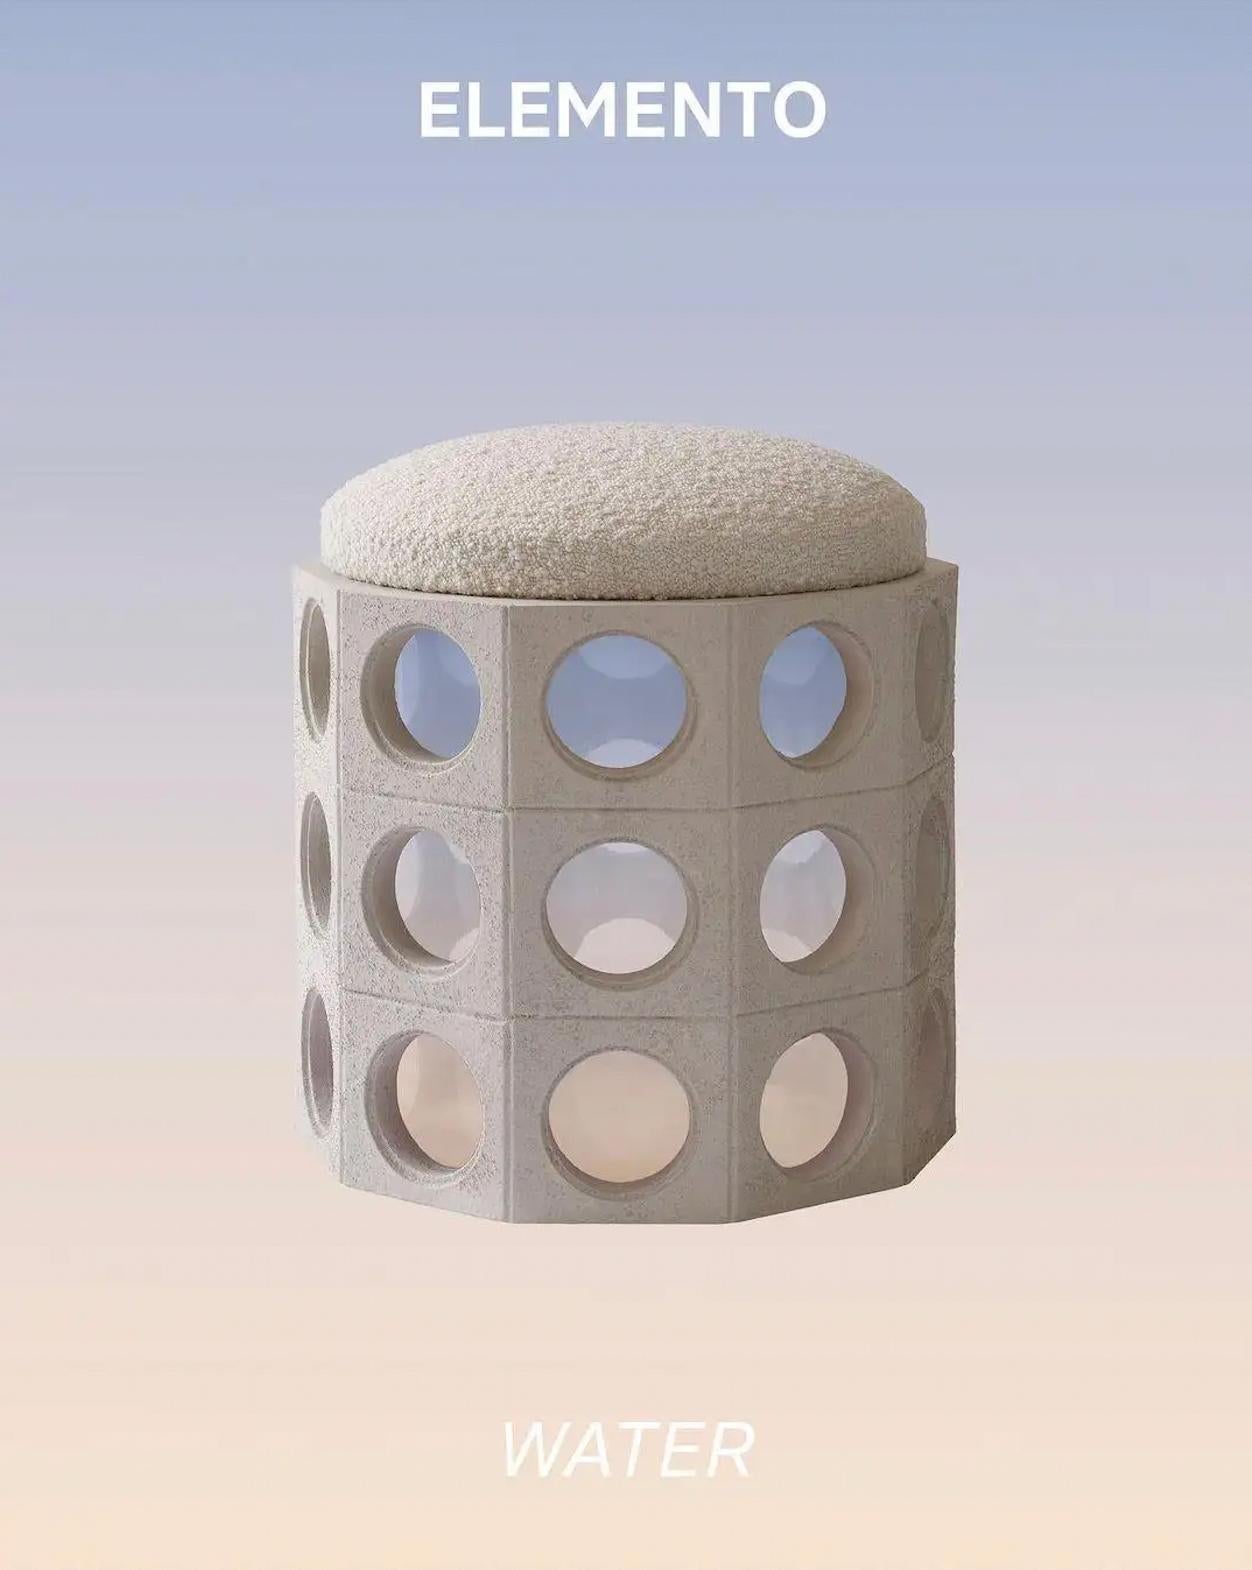 Taste the glance of a Luxurious way of Comfort. 

A pouf that could well be a kaleidoscopic Meccano through which to see reality in different ways, from different perspectives, and that connects with the idea of social utopias, of collective